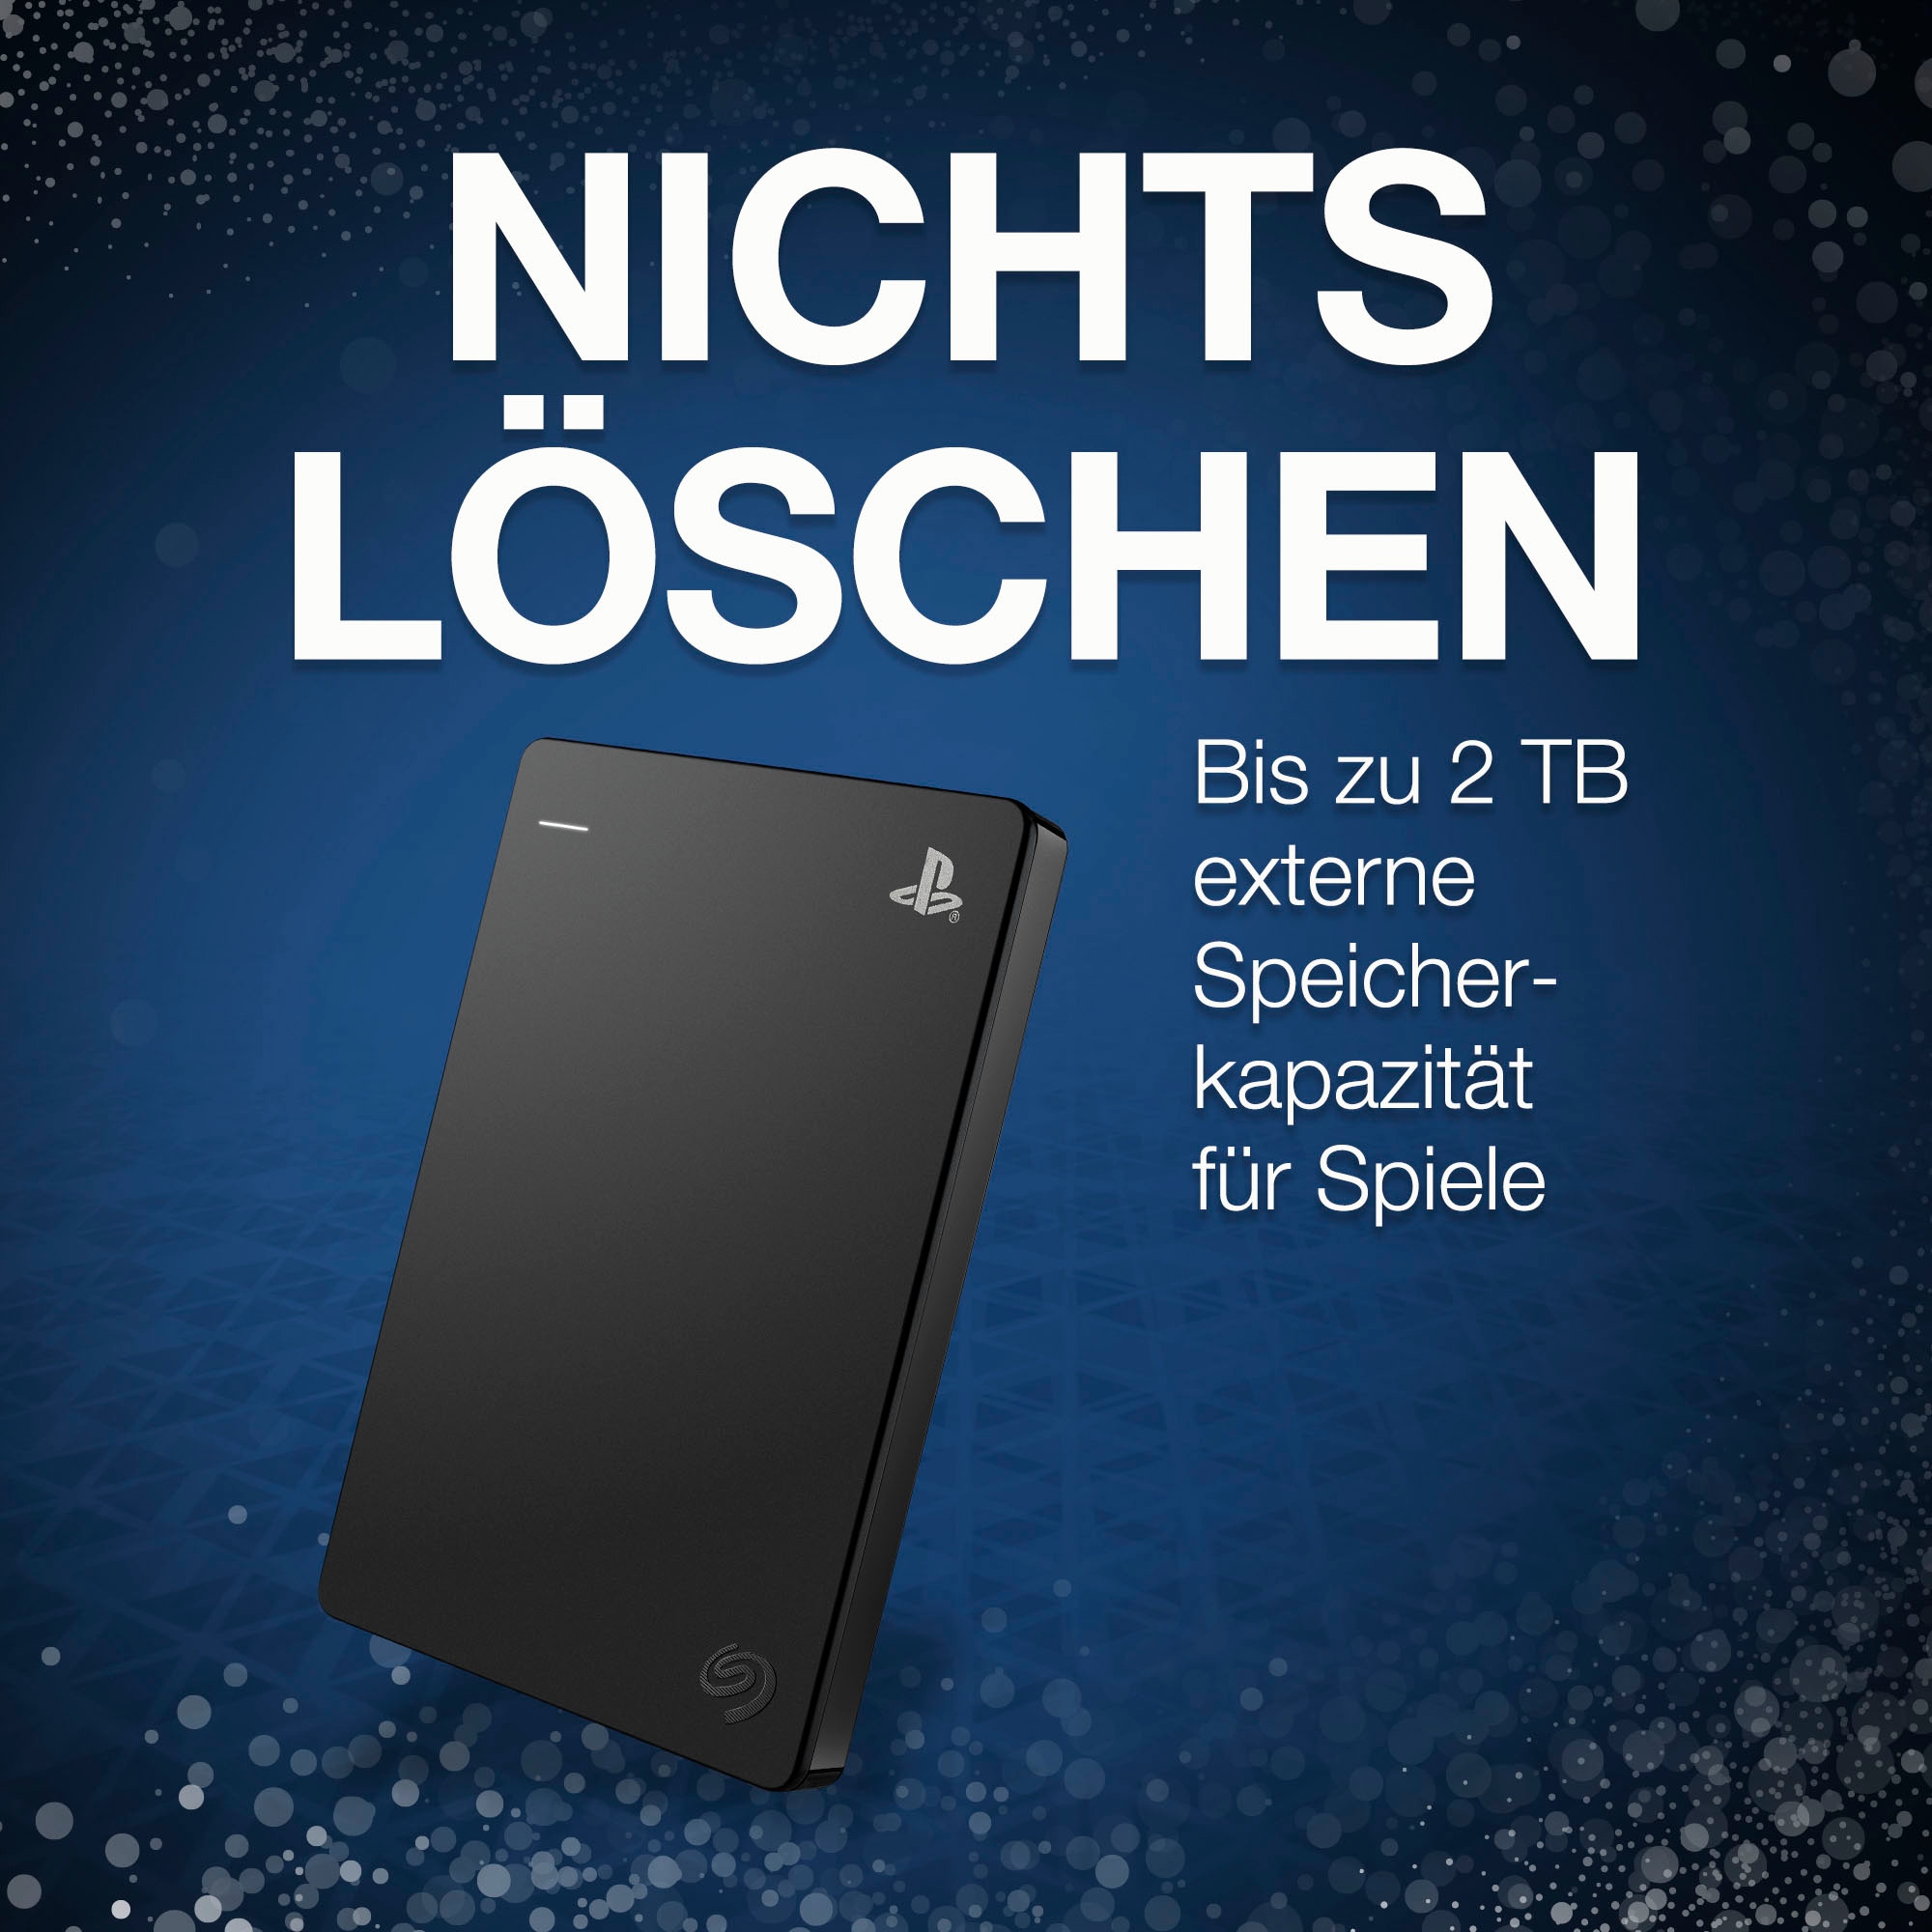 2,5 | Anschluss PS4 3.2 externe USB BAUR »Game Drive Gaming-Festplatte Seagate STGD2000200«, Zoll,